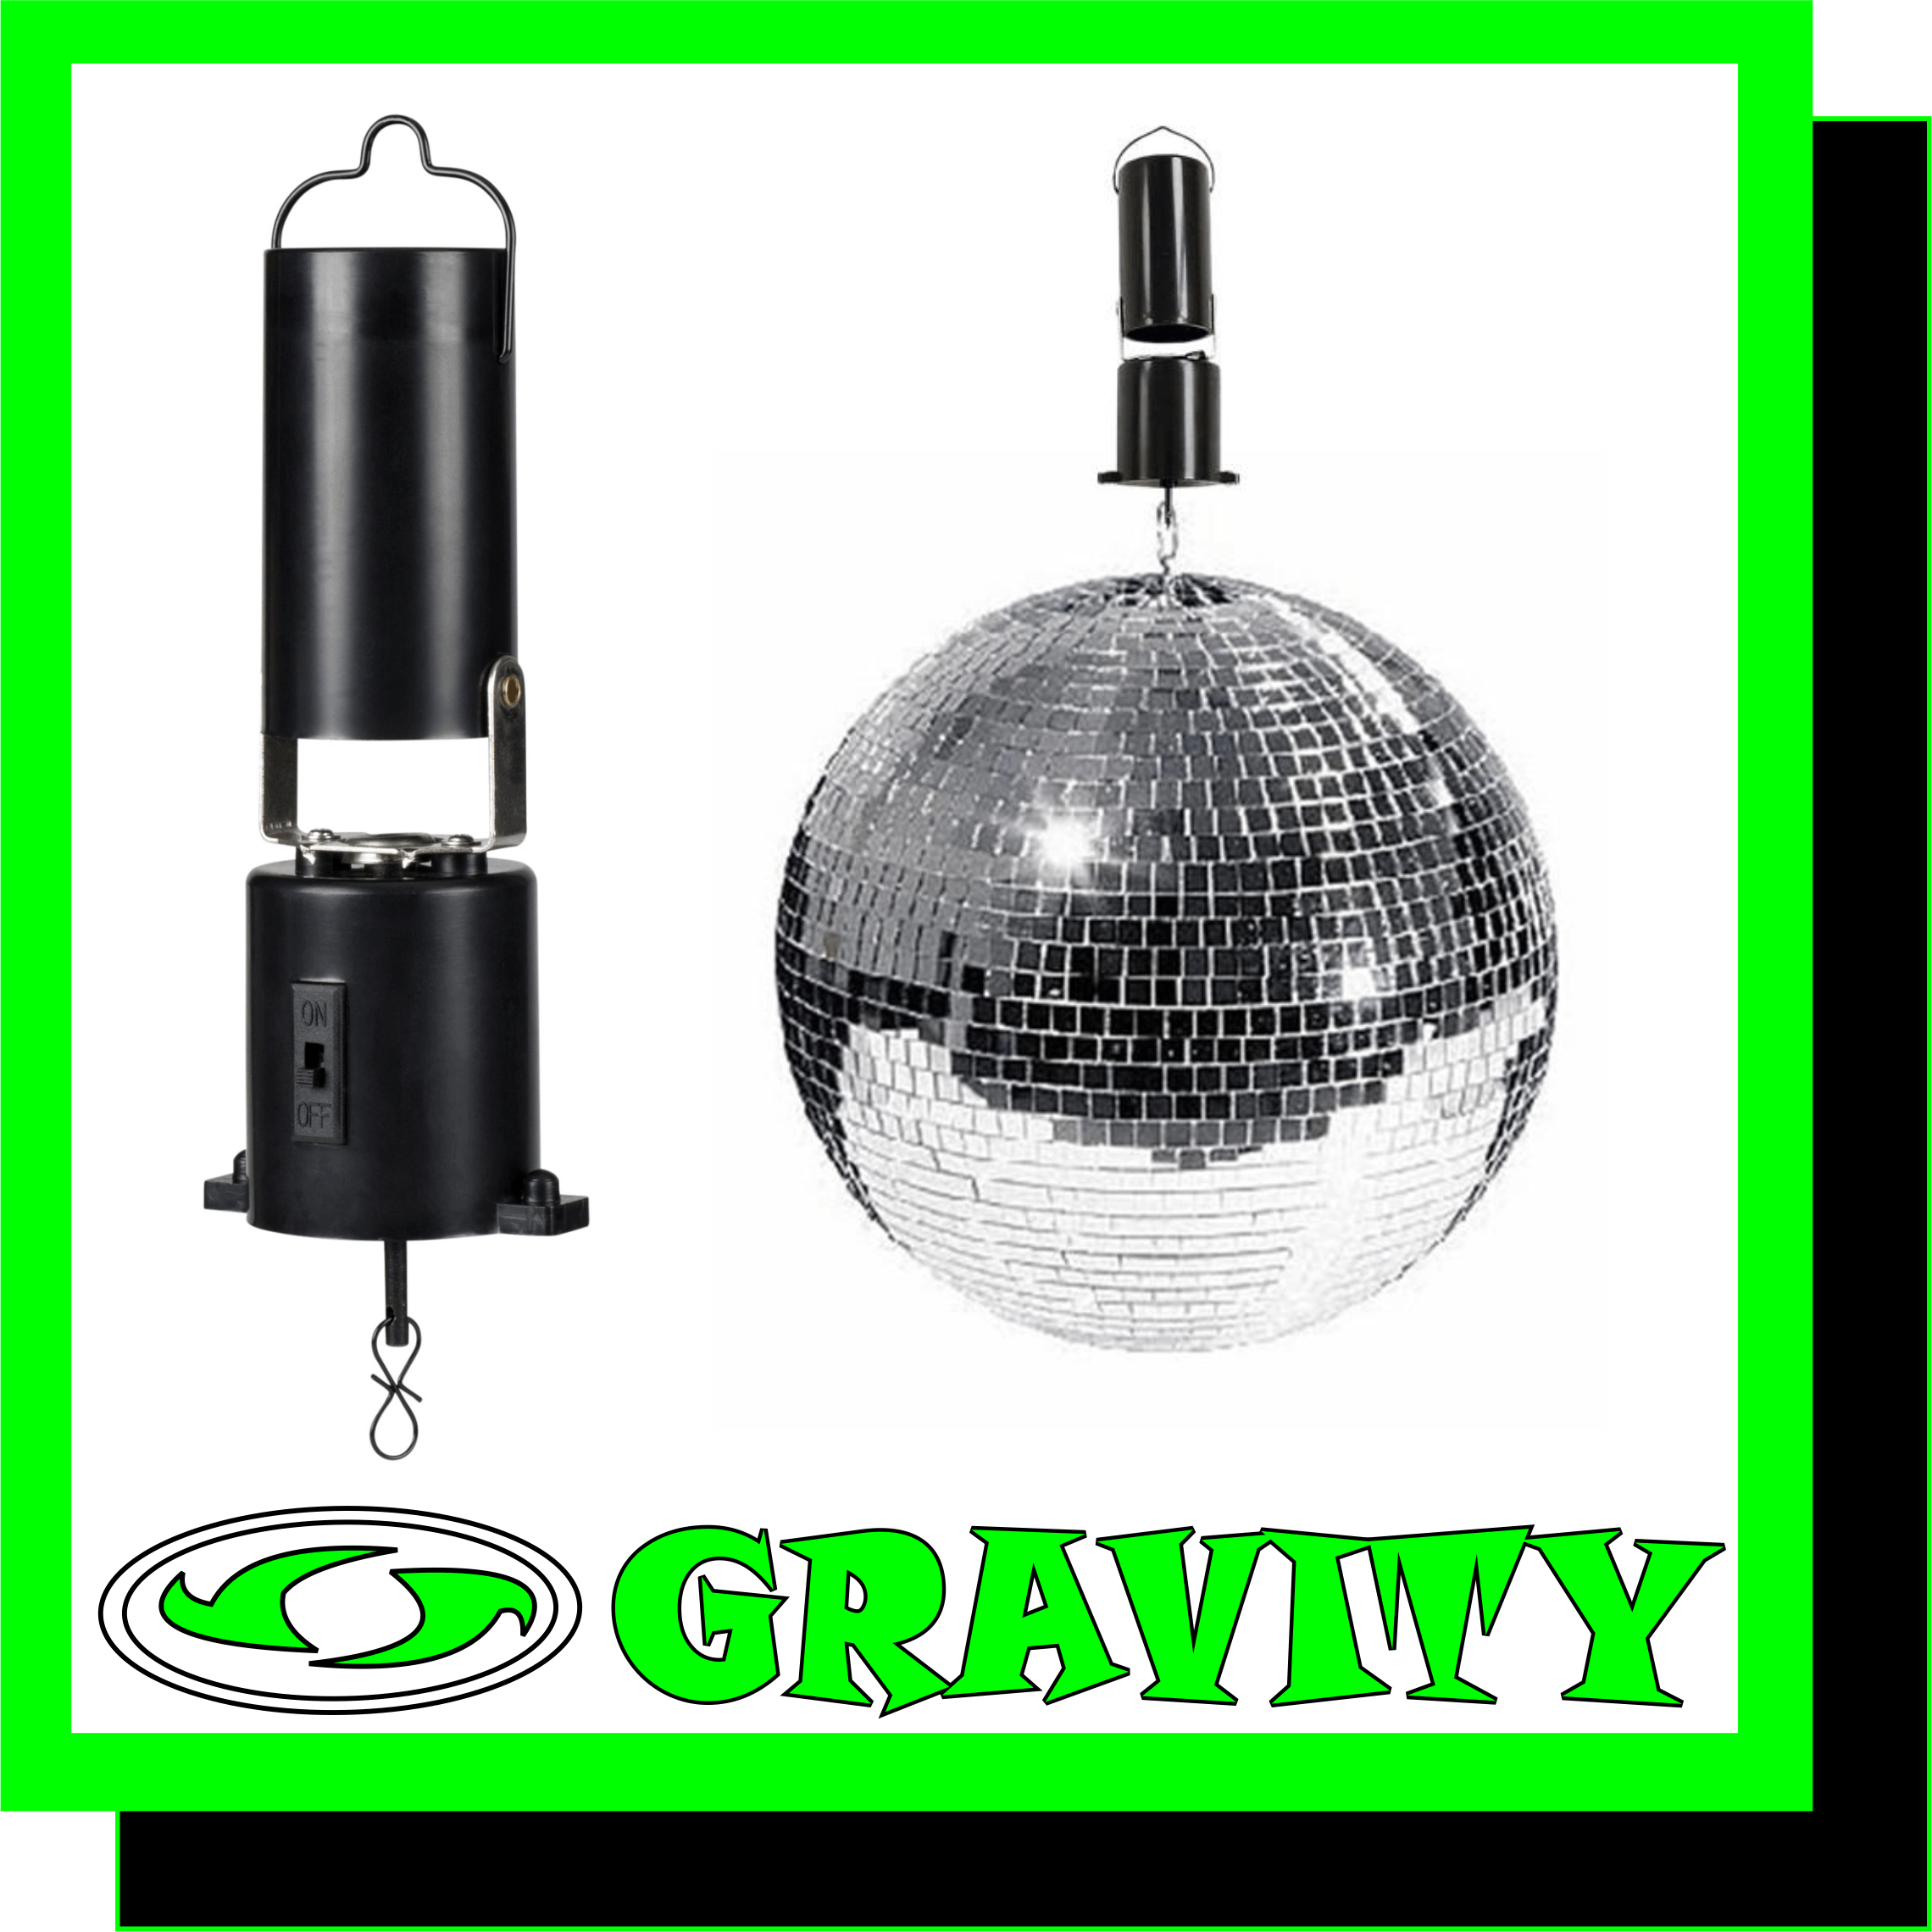 Battery Operated Mirror Ball Motor  Battery Powered Mirror Ball Motor  Motor For Mirror Balls Up to 2kg in weight  Ideal for venues without wall socket  on/off switch fitted